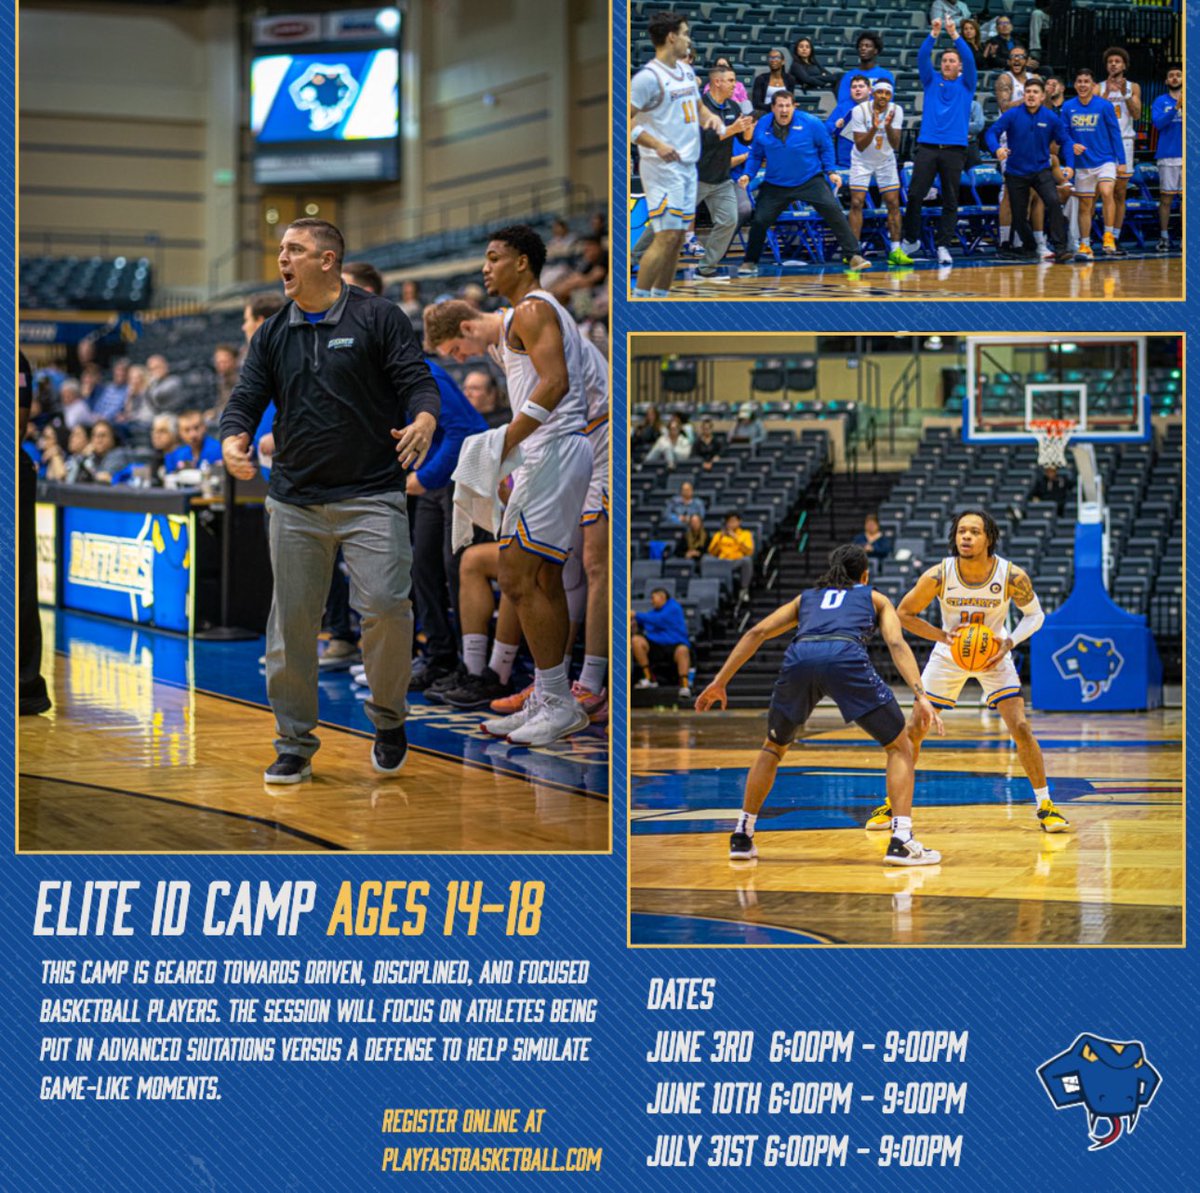 It’s the weekend, perfect time to register for the Shooting Clinics and Elite ID camps that will be going on this summer! Can’t wait to see all of y’all this summer!#FangsOut🐍 @StMUmbb Click the link for more information! playfastbasketball.com